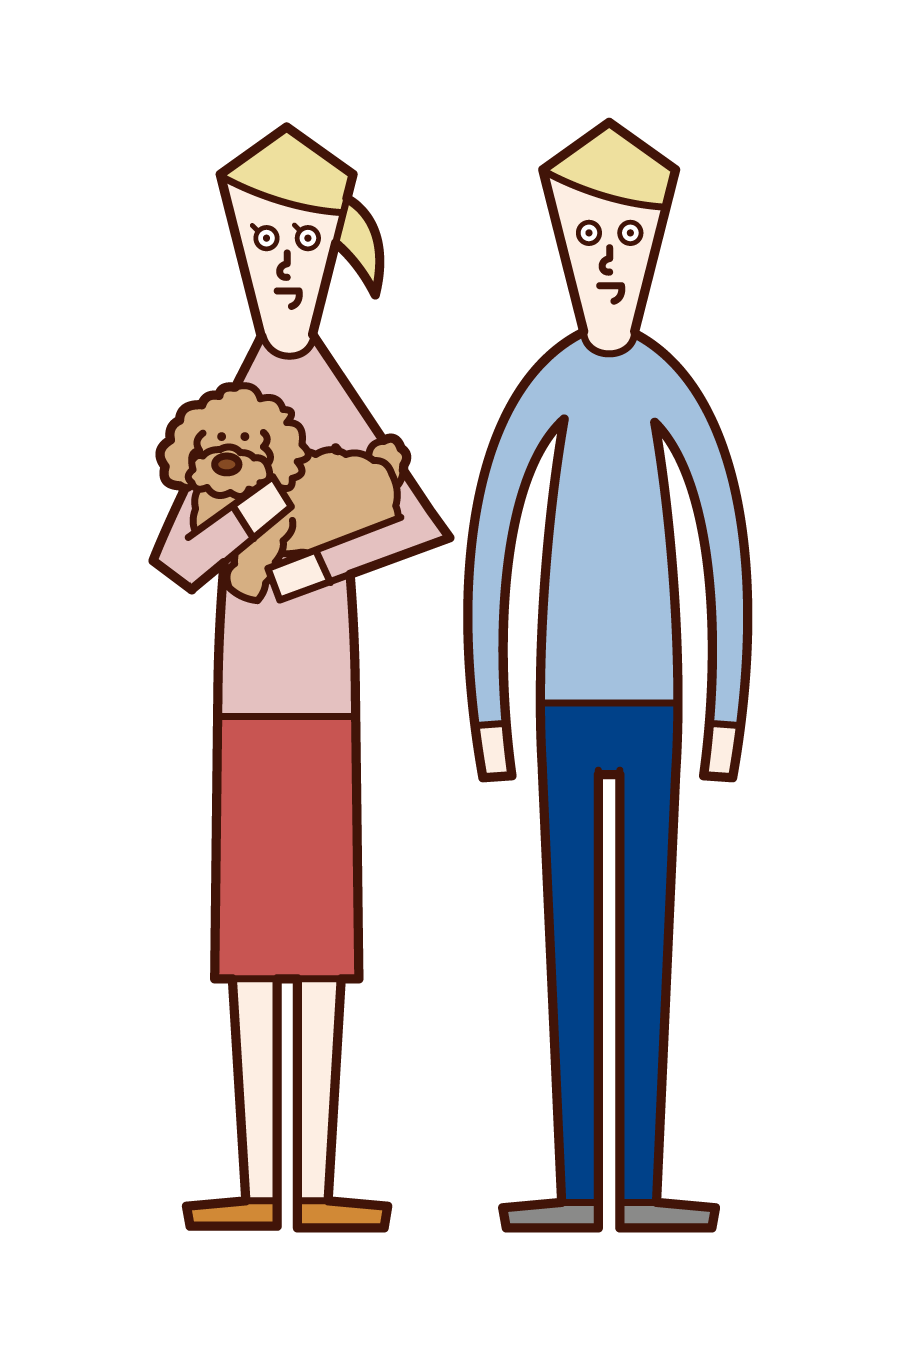 Illustration of a couple with a dog